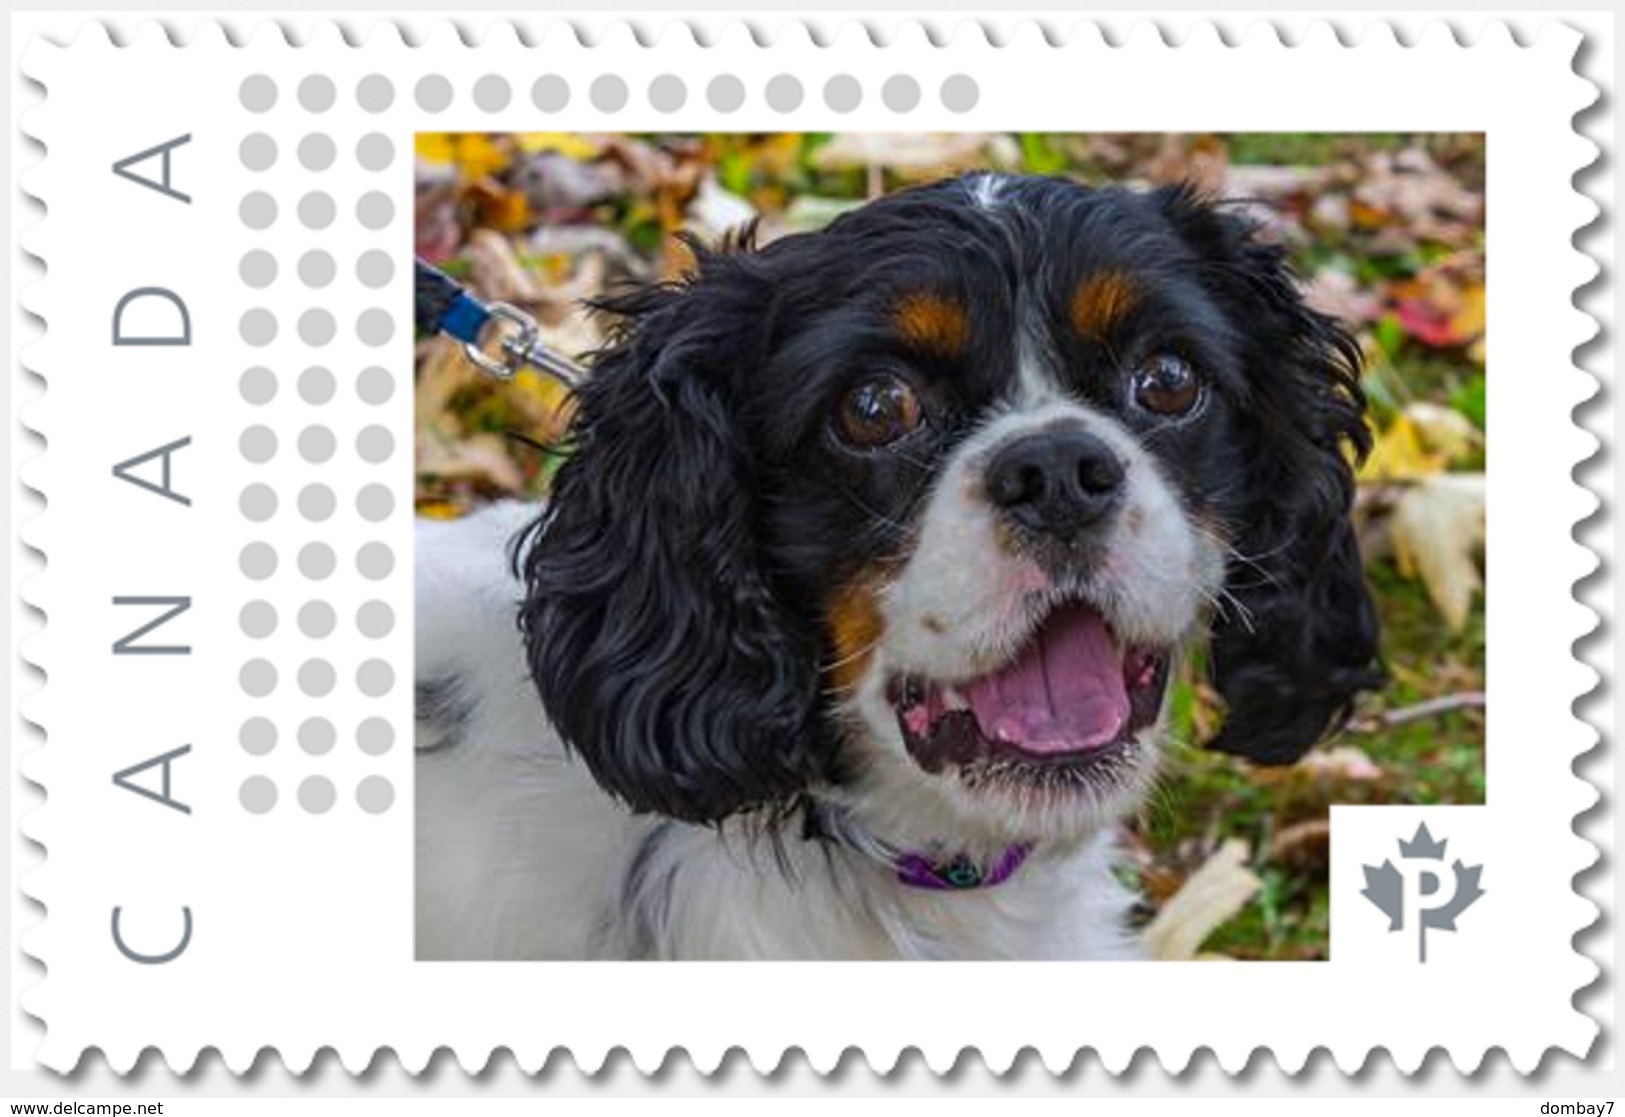 SPANIEL = DOG = Picture Postage Canada 2019 [p19-04s15] MNH-VF+ - Dogs